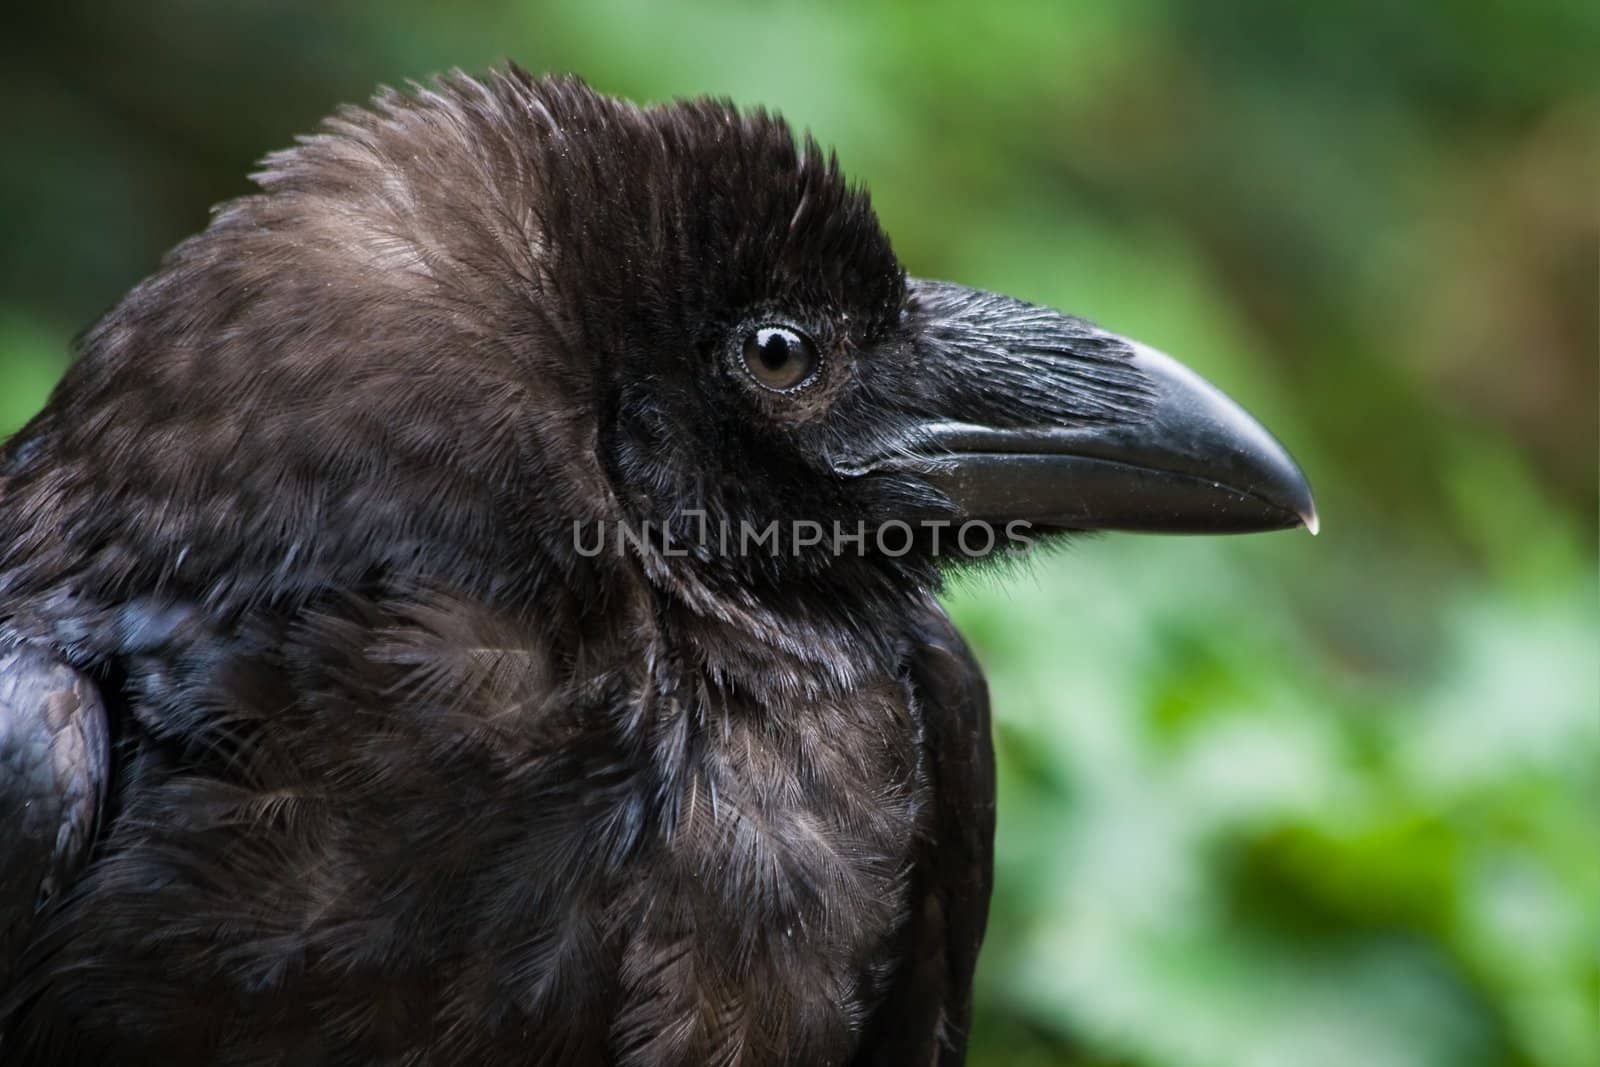 Common raven or Northern raven in side angle view - horizontal image